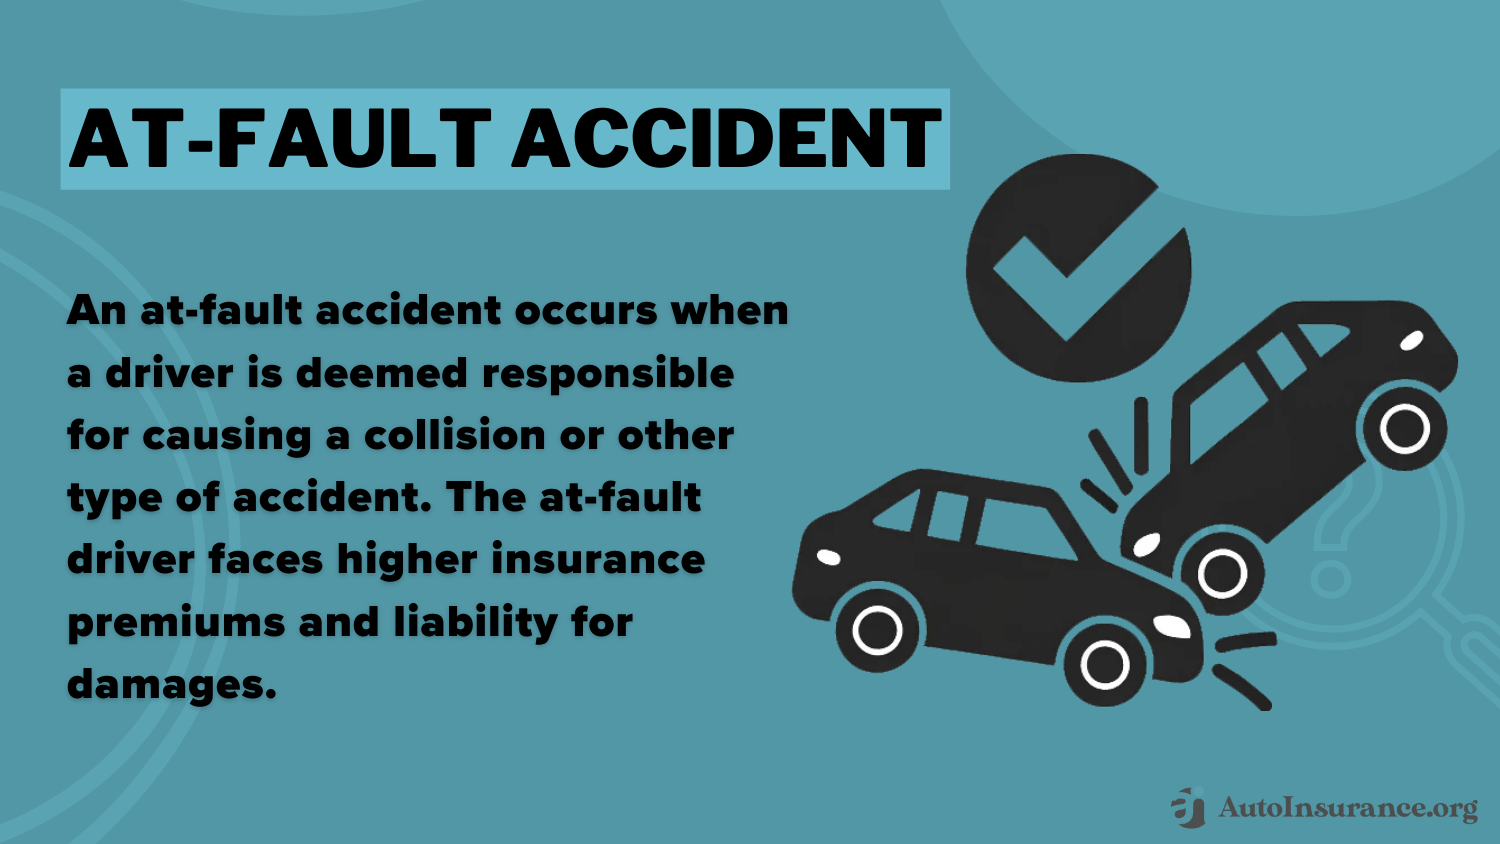 Collision Auto Insurance: At-Fault Accident Definition Card